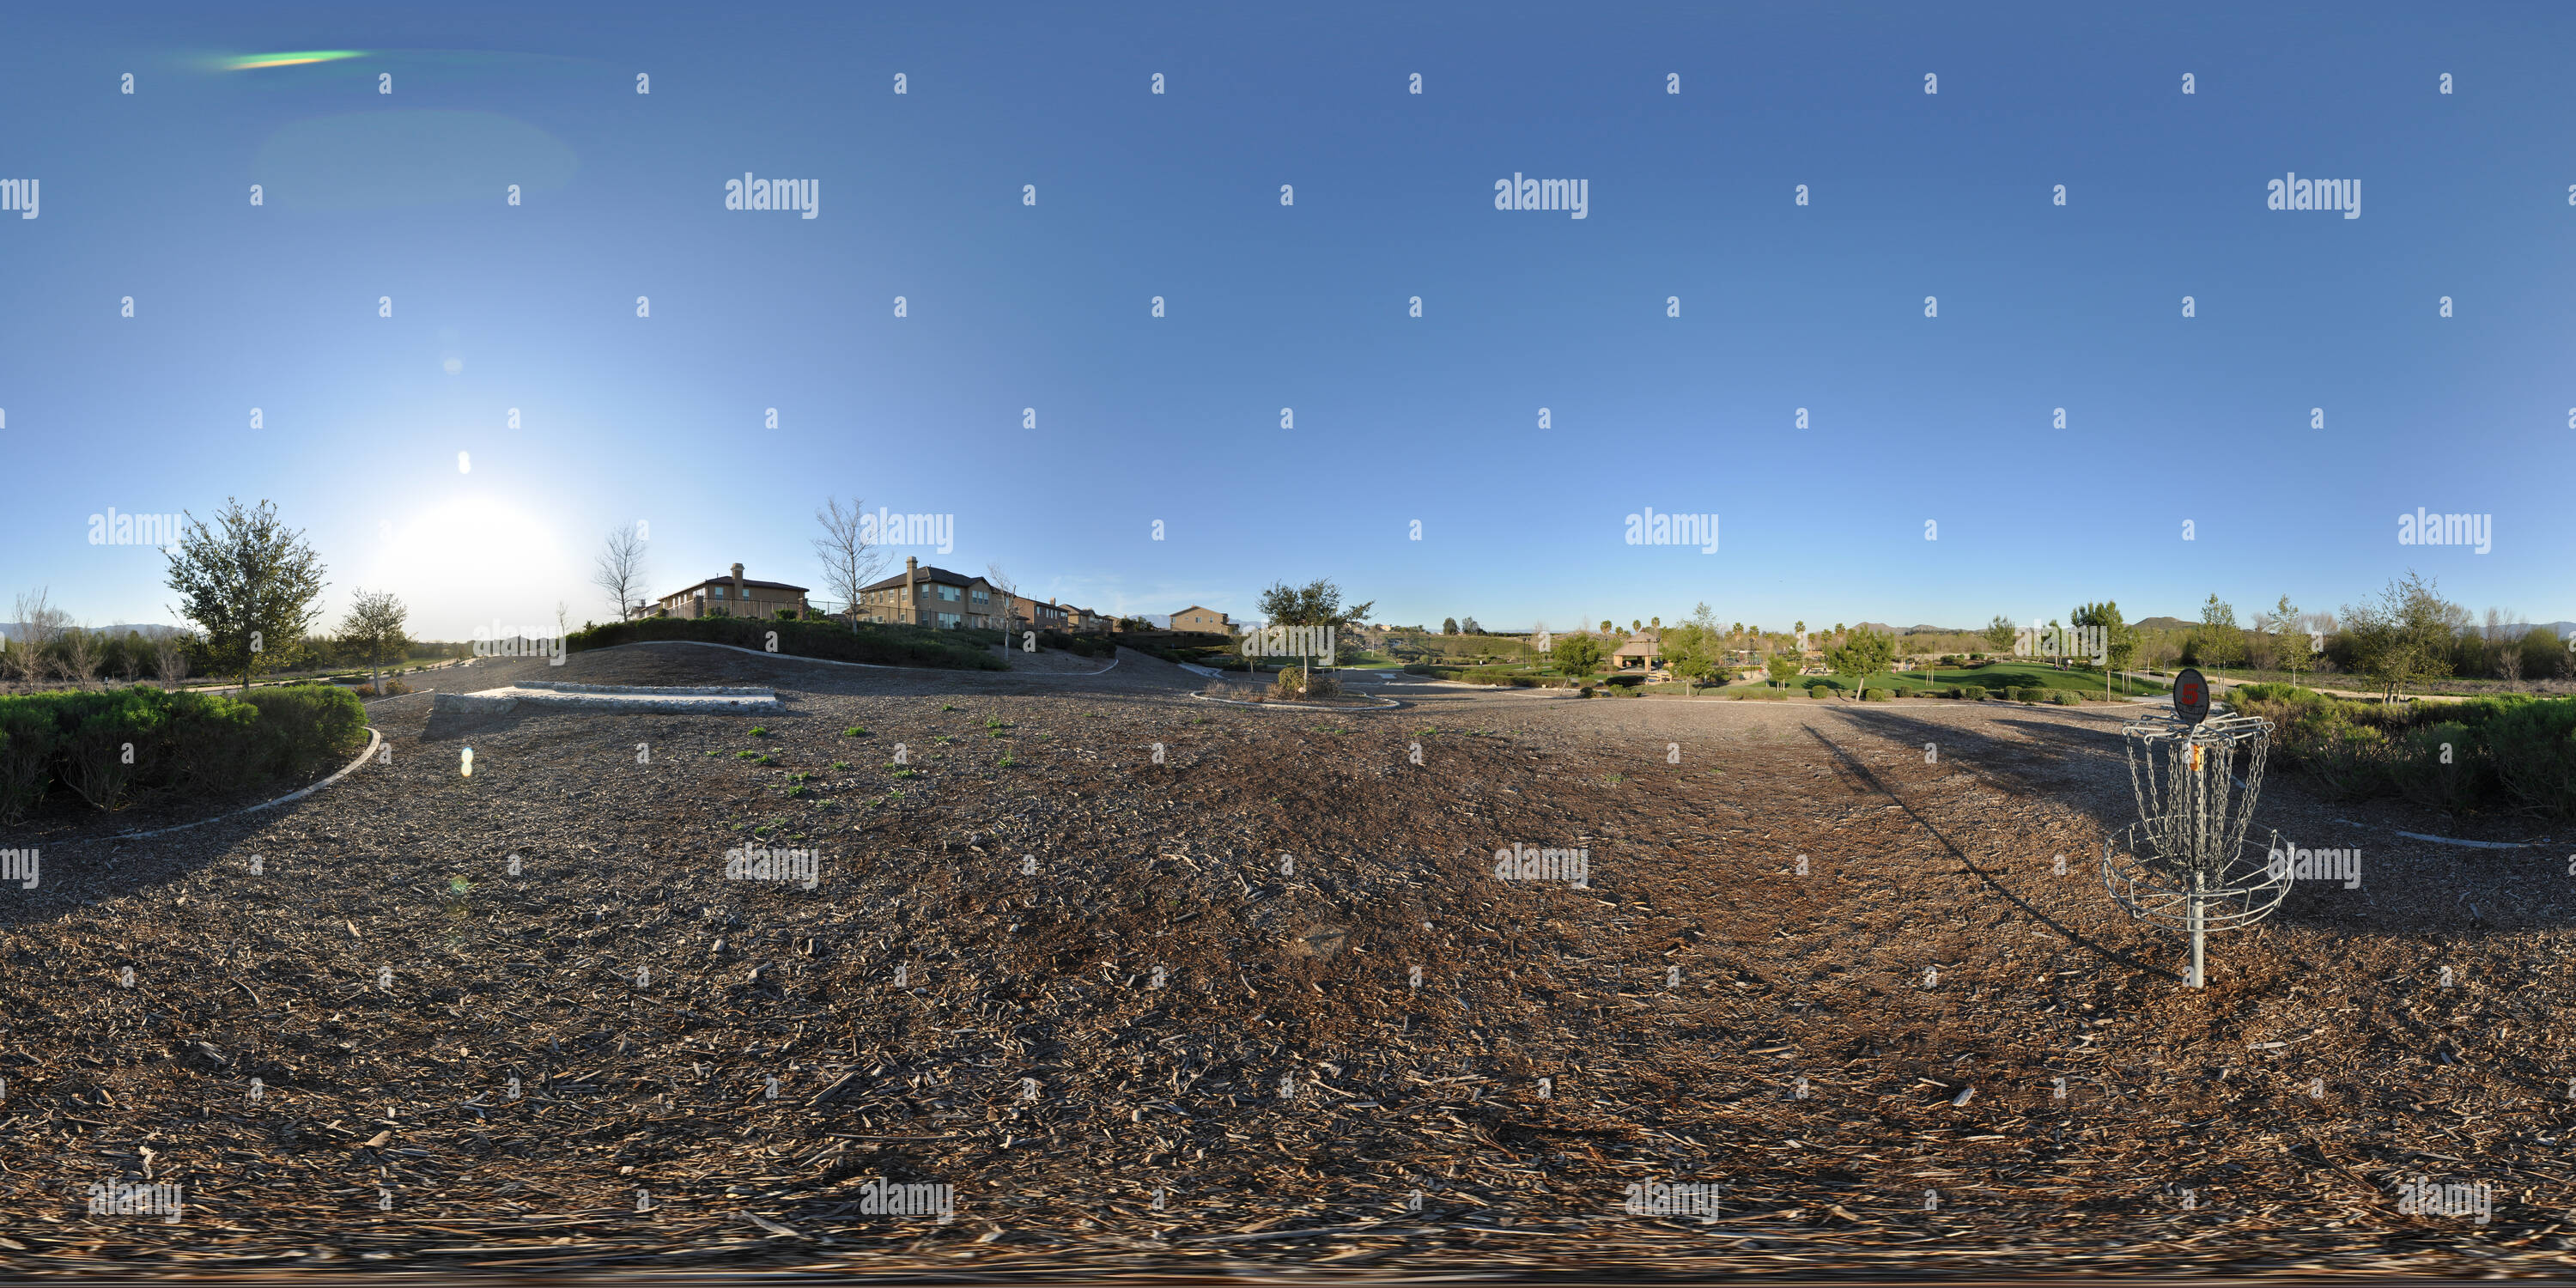 360° view of Disc Golf Course at Riverwalk Park in Eastvale, CA Alamy